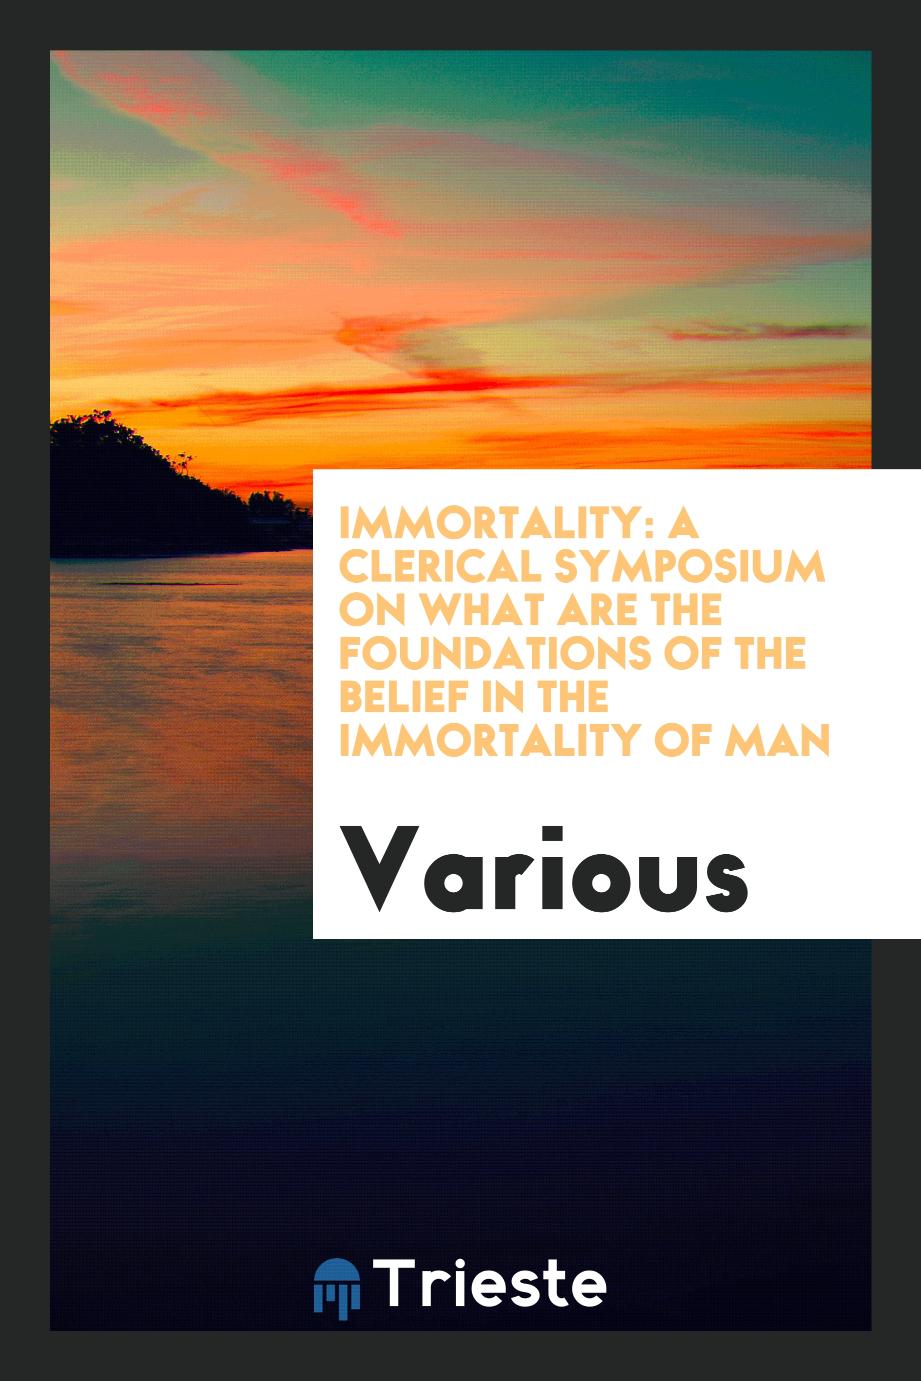 Immortality: a clerical symposium on what are the foundations of the belief in the immortality of man